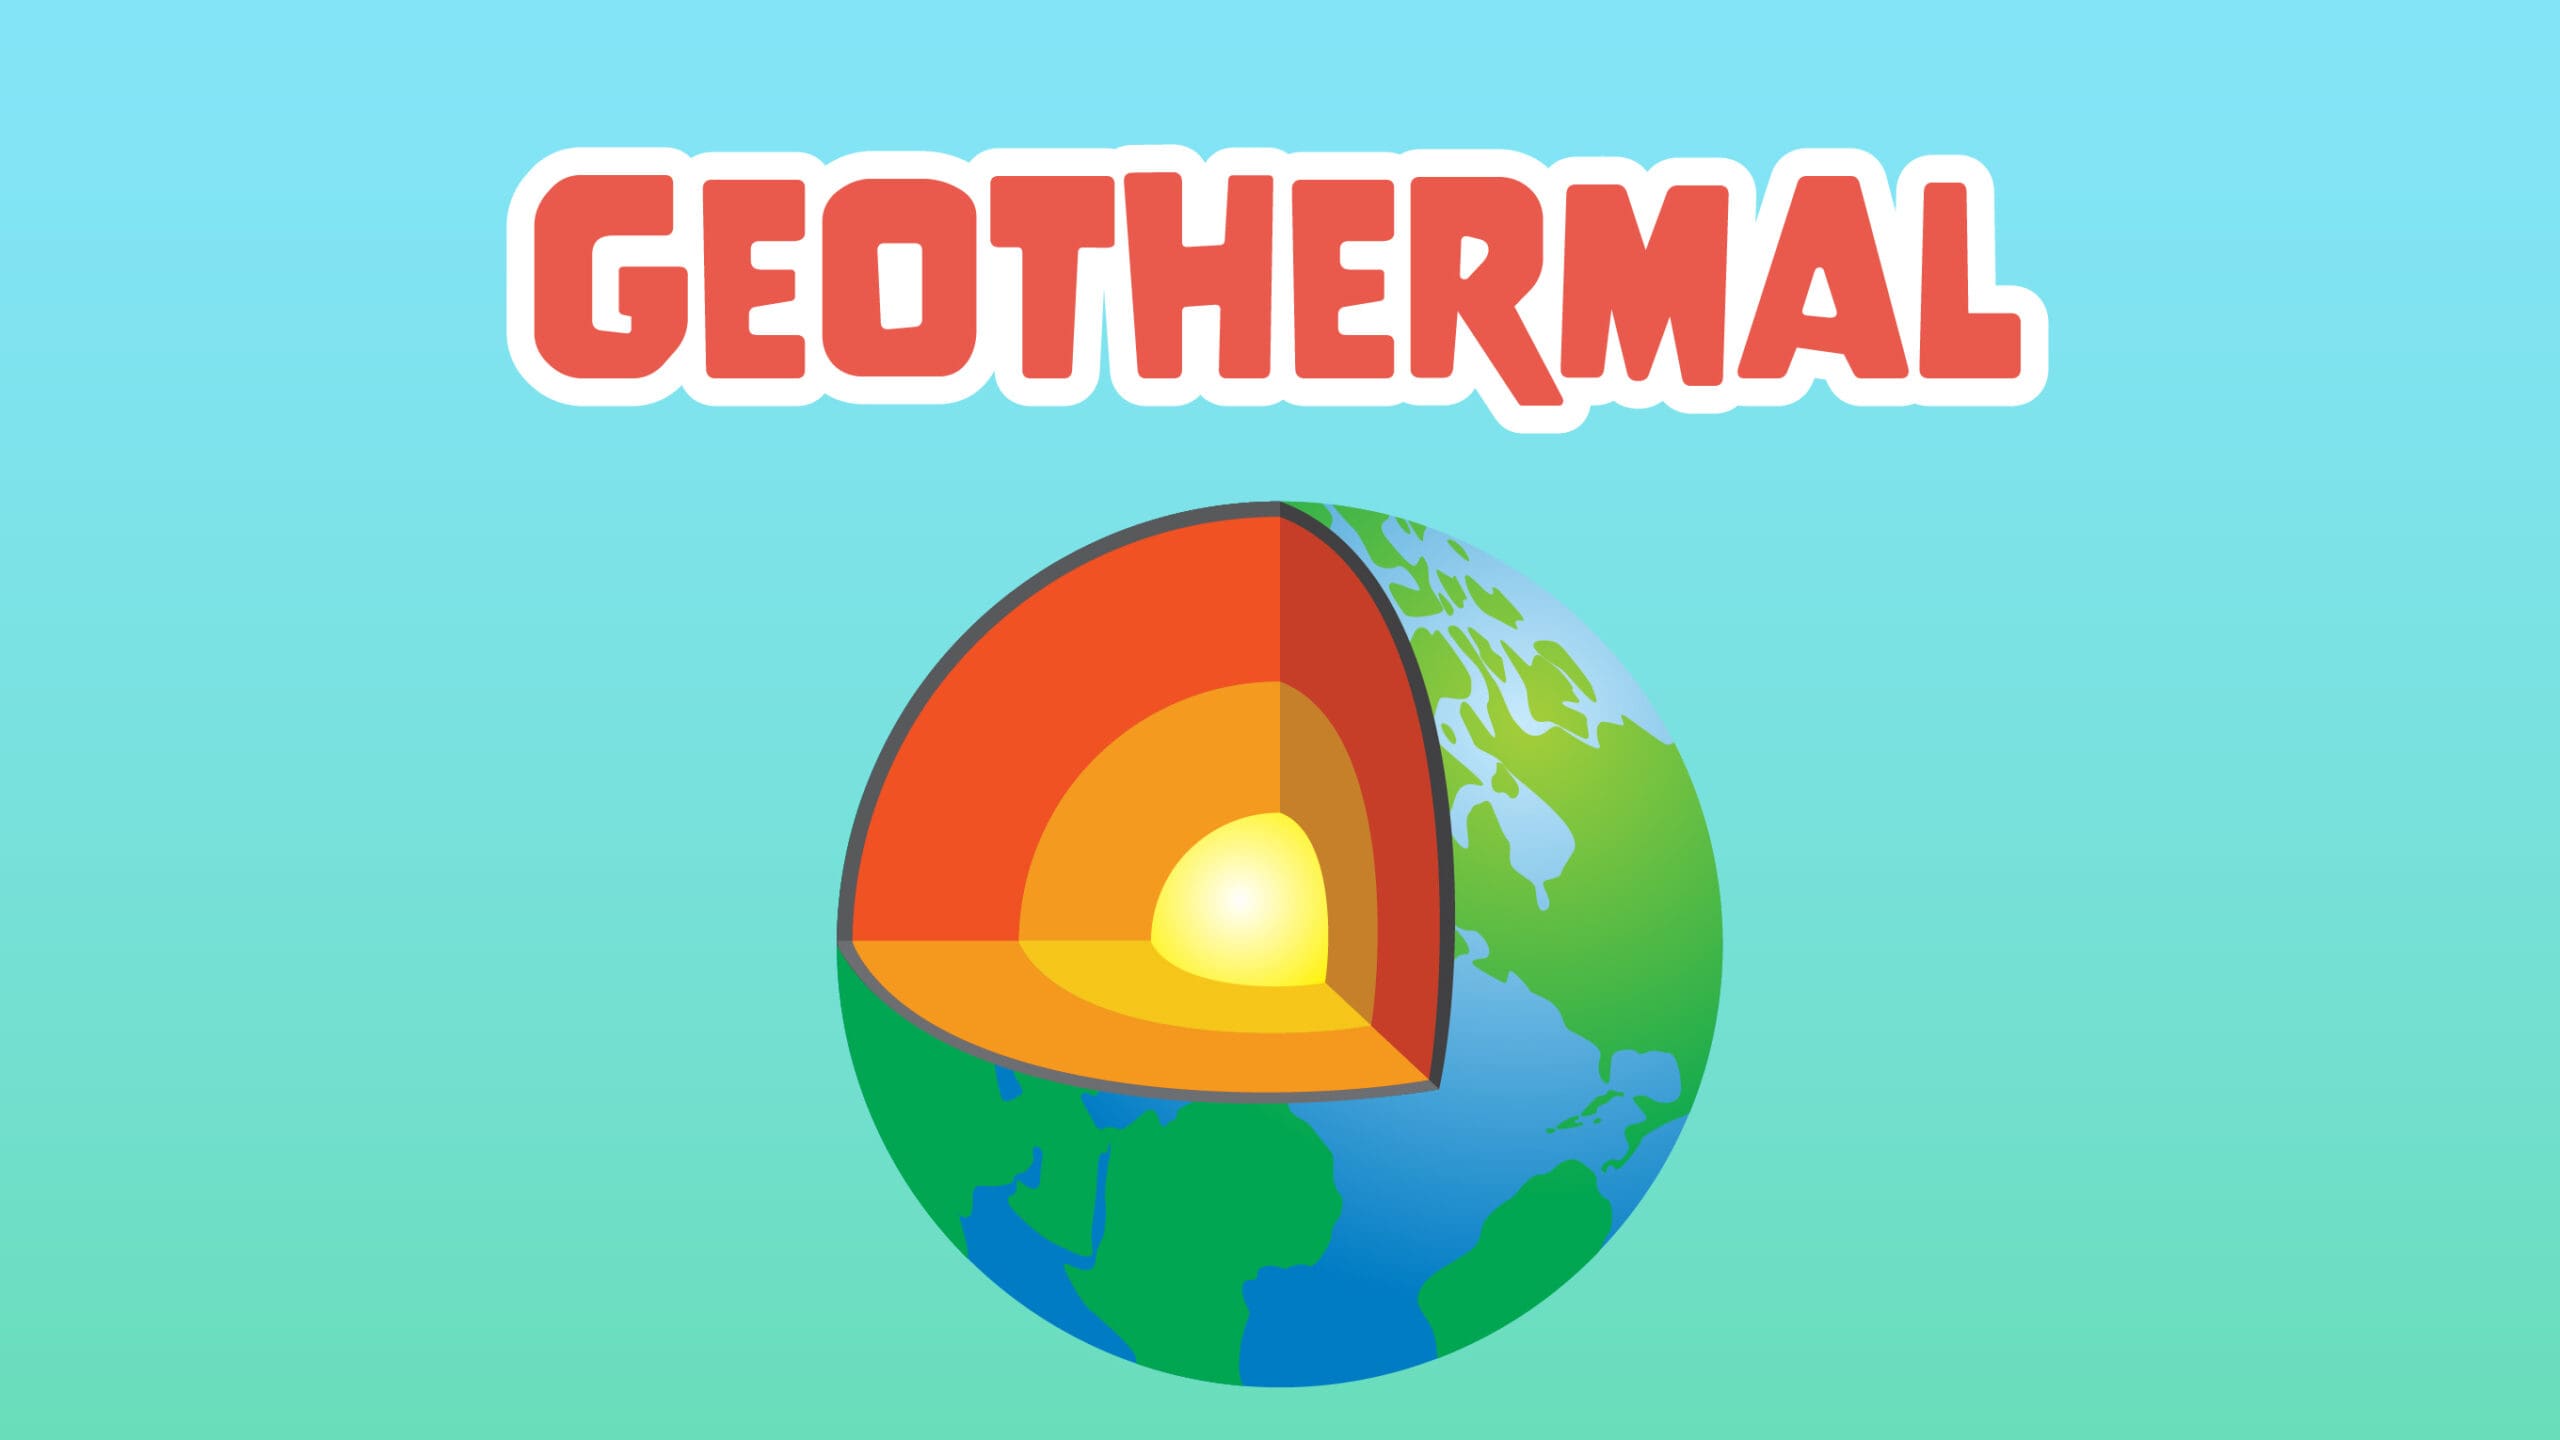 Geothermal Energy Facts for Kids – 5 Energetic Facts about Geothermal Energy